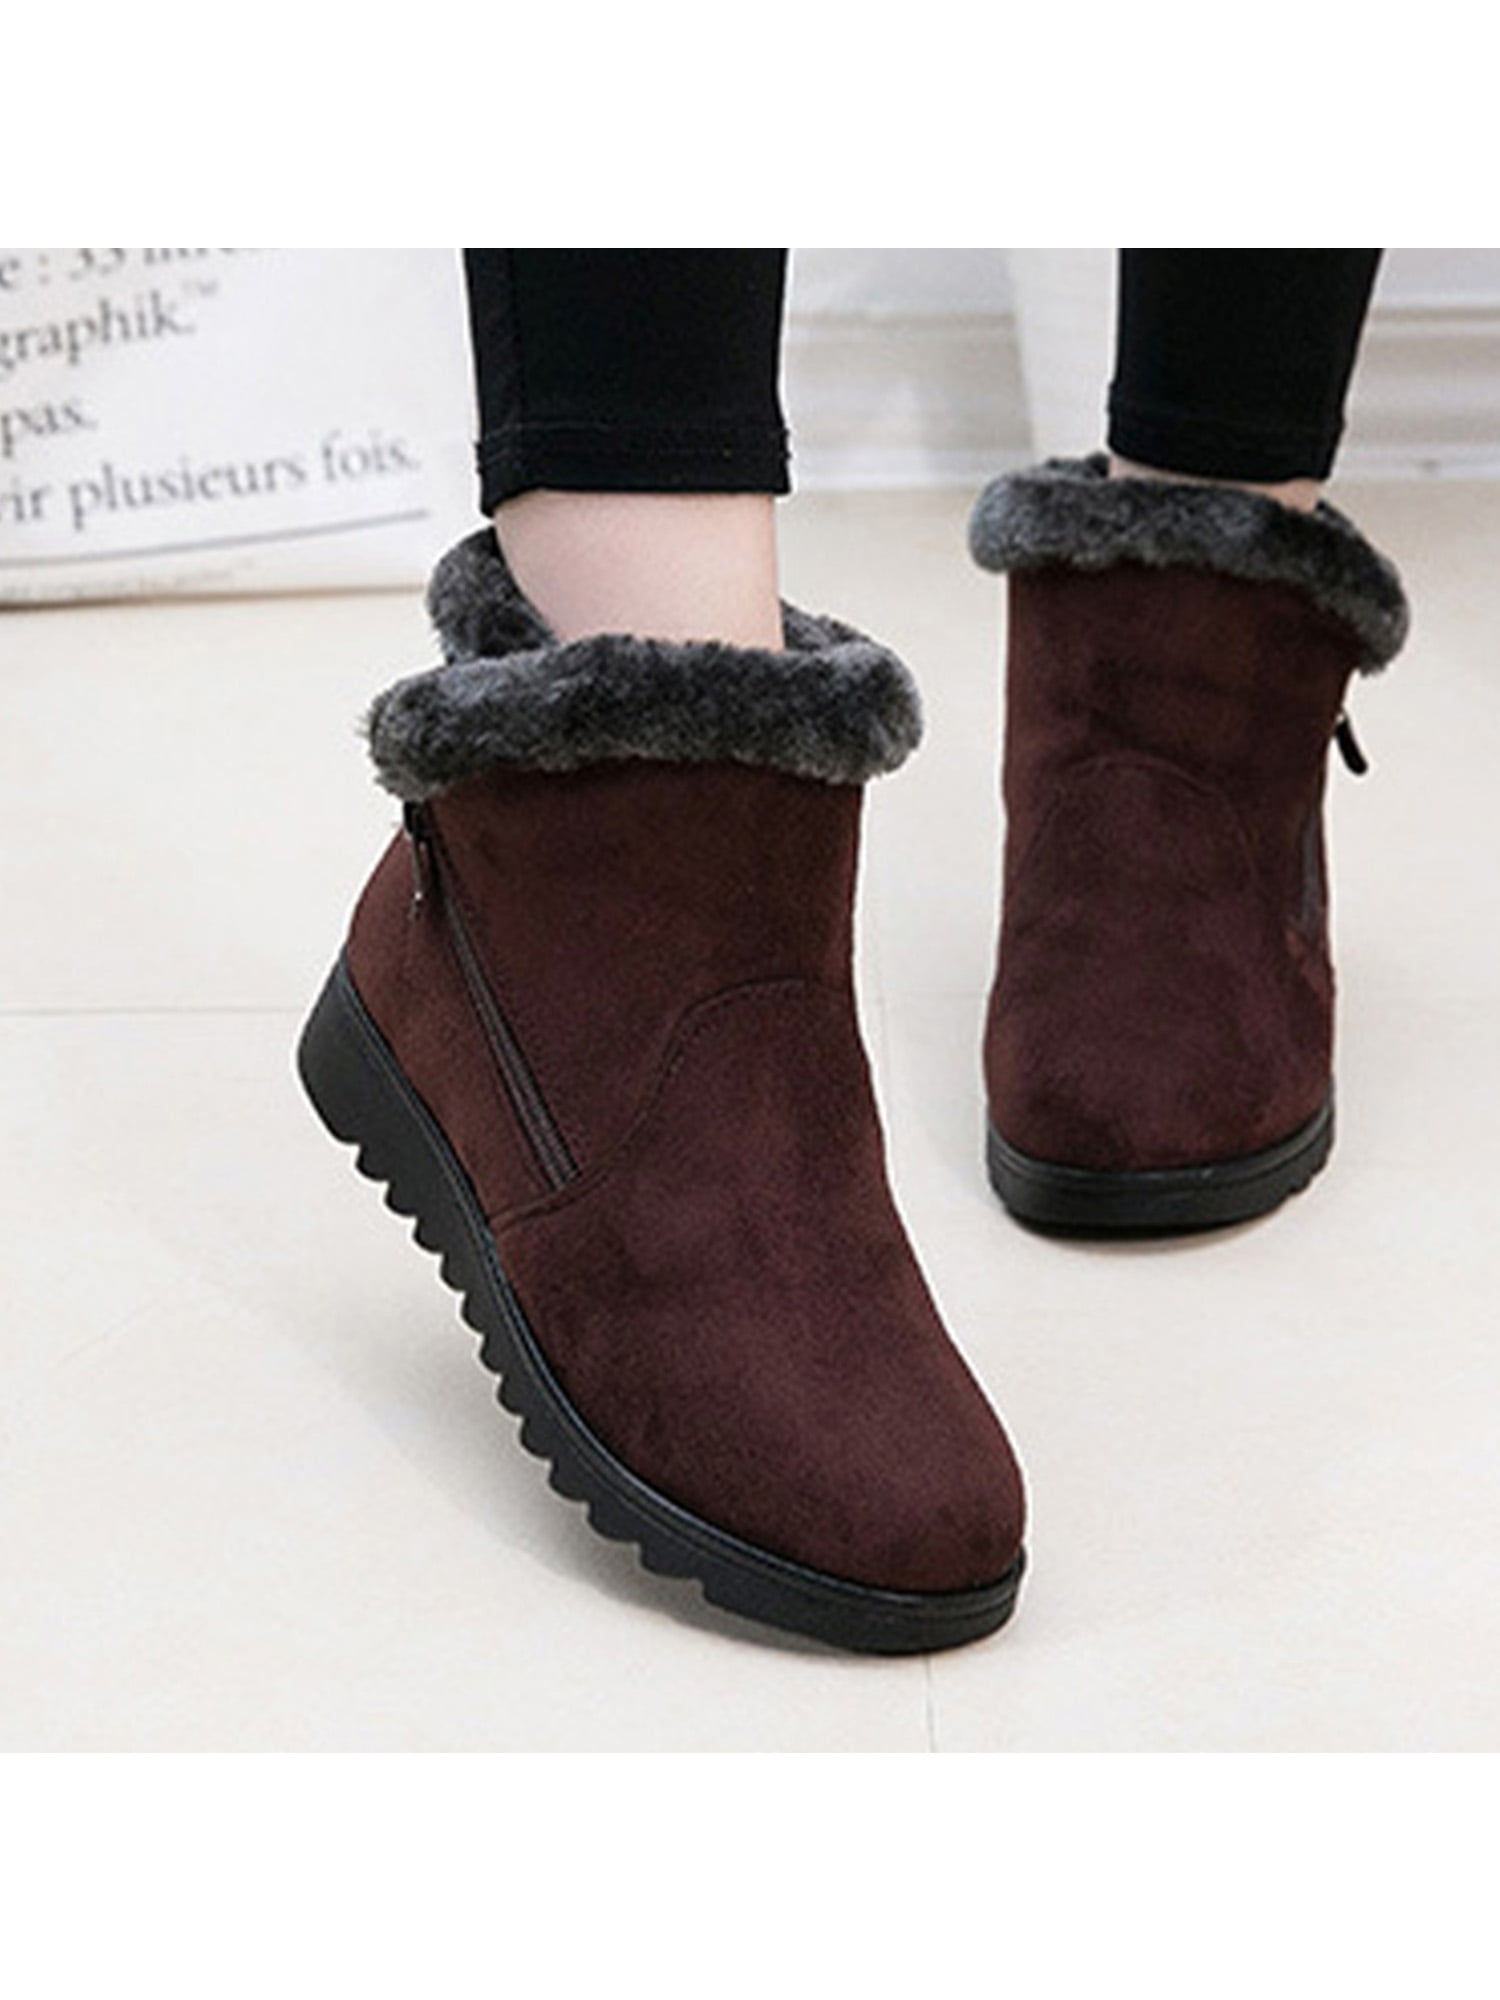 Women Shoes Winter Genuine Leather Ankle Boot for Woman Warm Fur Lady Snow Boots Button,37 